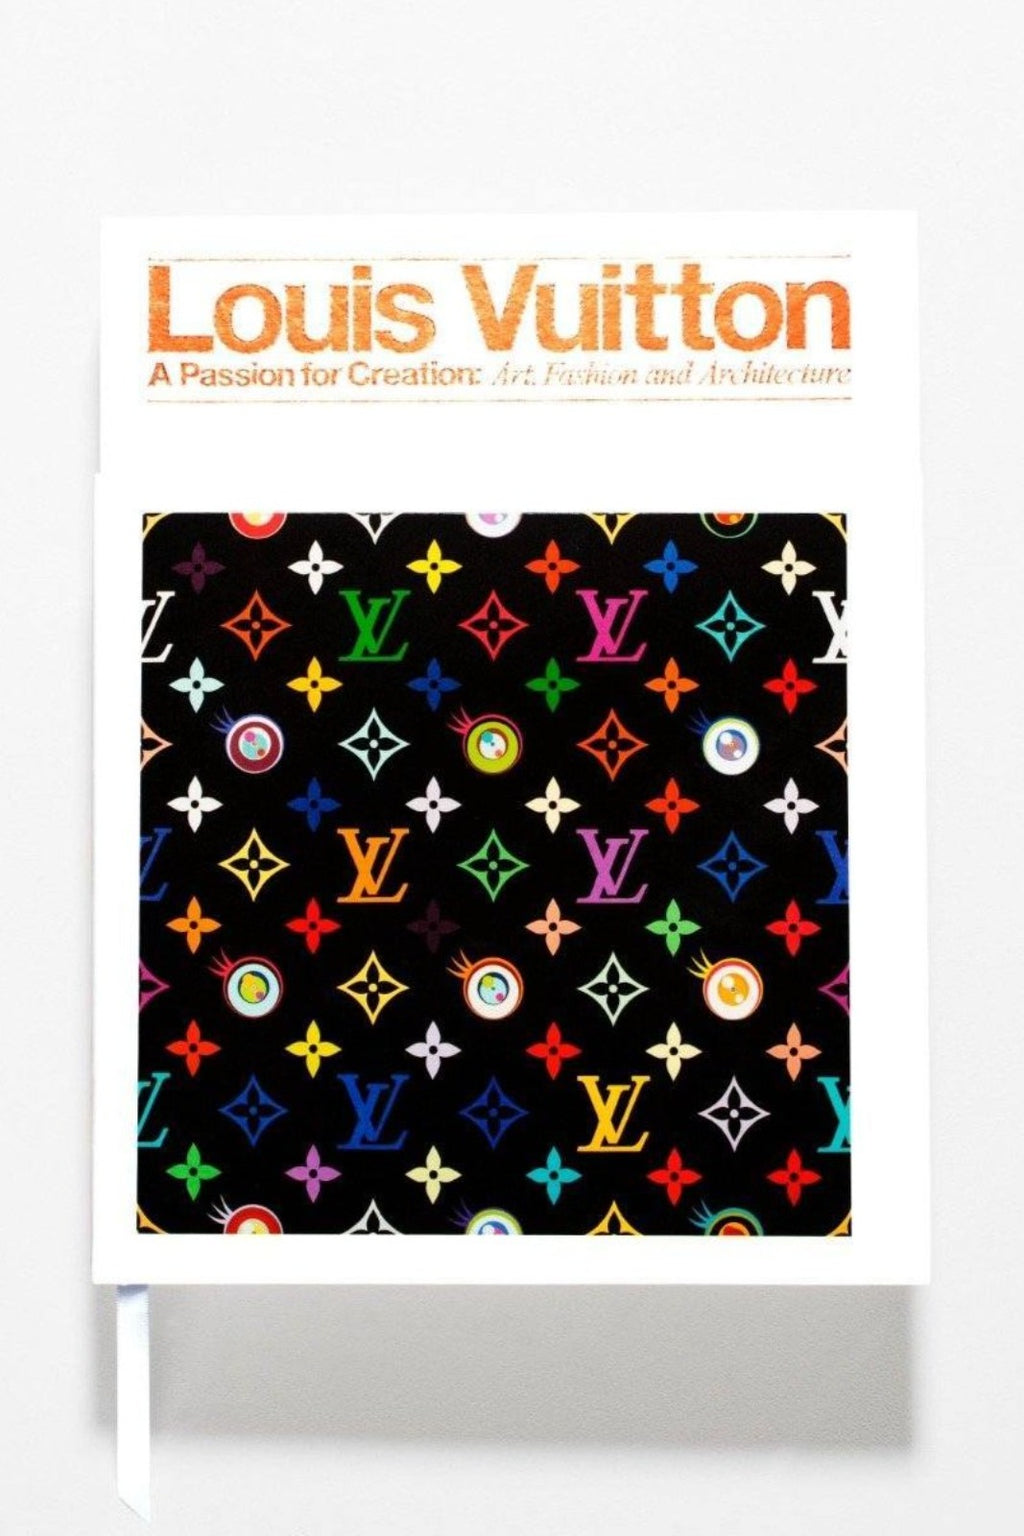 LOUIS VUITTON: A PASSION FOR CREATION BOOK